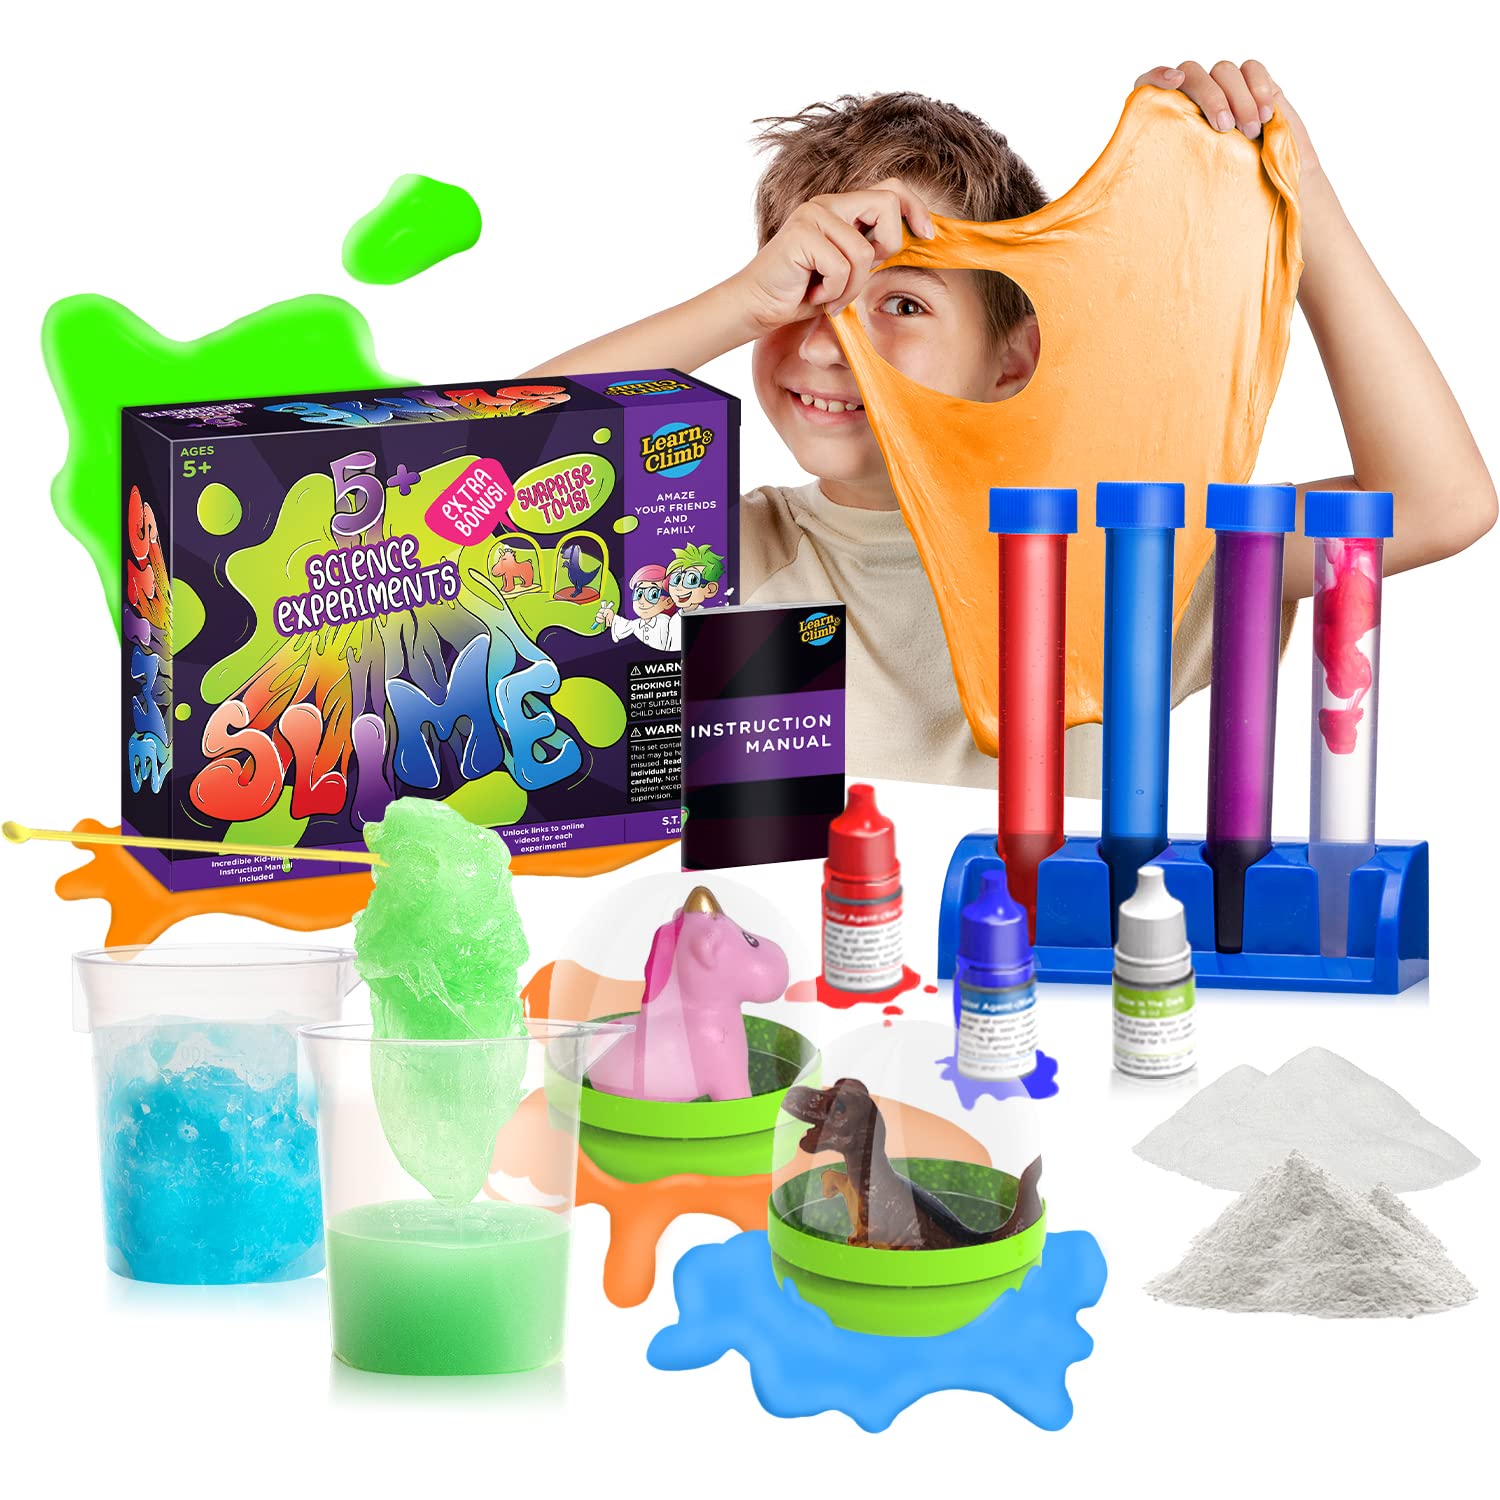 Create Your Own Slime Kit